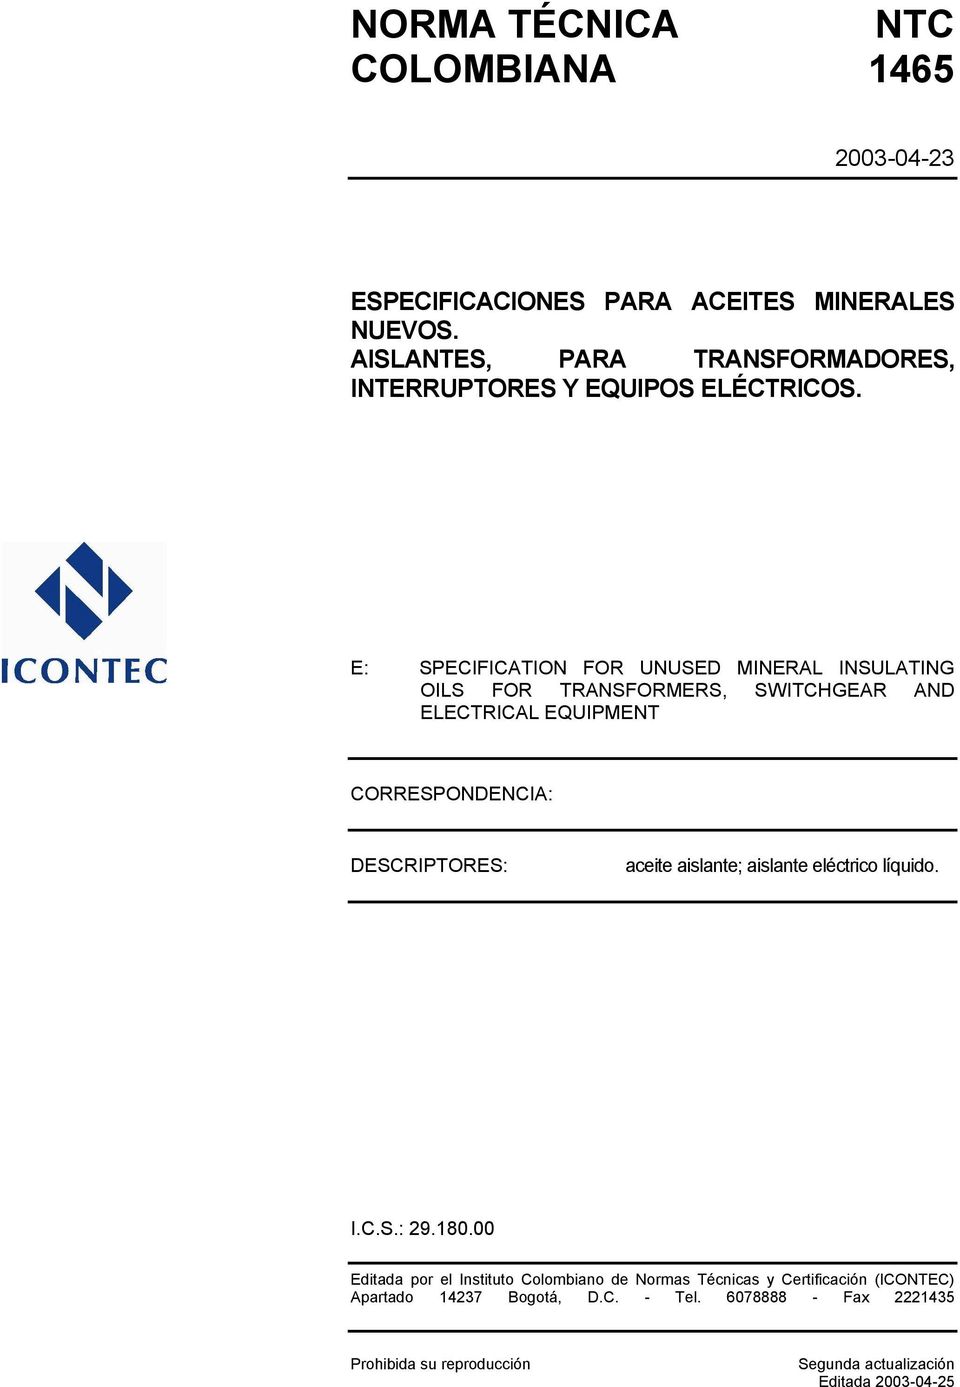 E: SPECIFICATION FOR UNUSED MINERAL INSULATING OILS FOR TRANSFORMERS, SWITCHGEAR AND ELECTRICAL EQUIPMENT CORRESPONDENCIA: DESCRIPTORES: